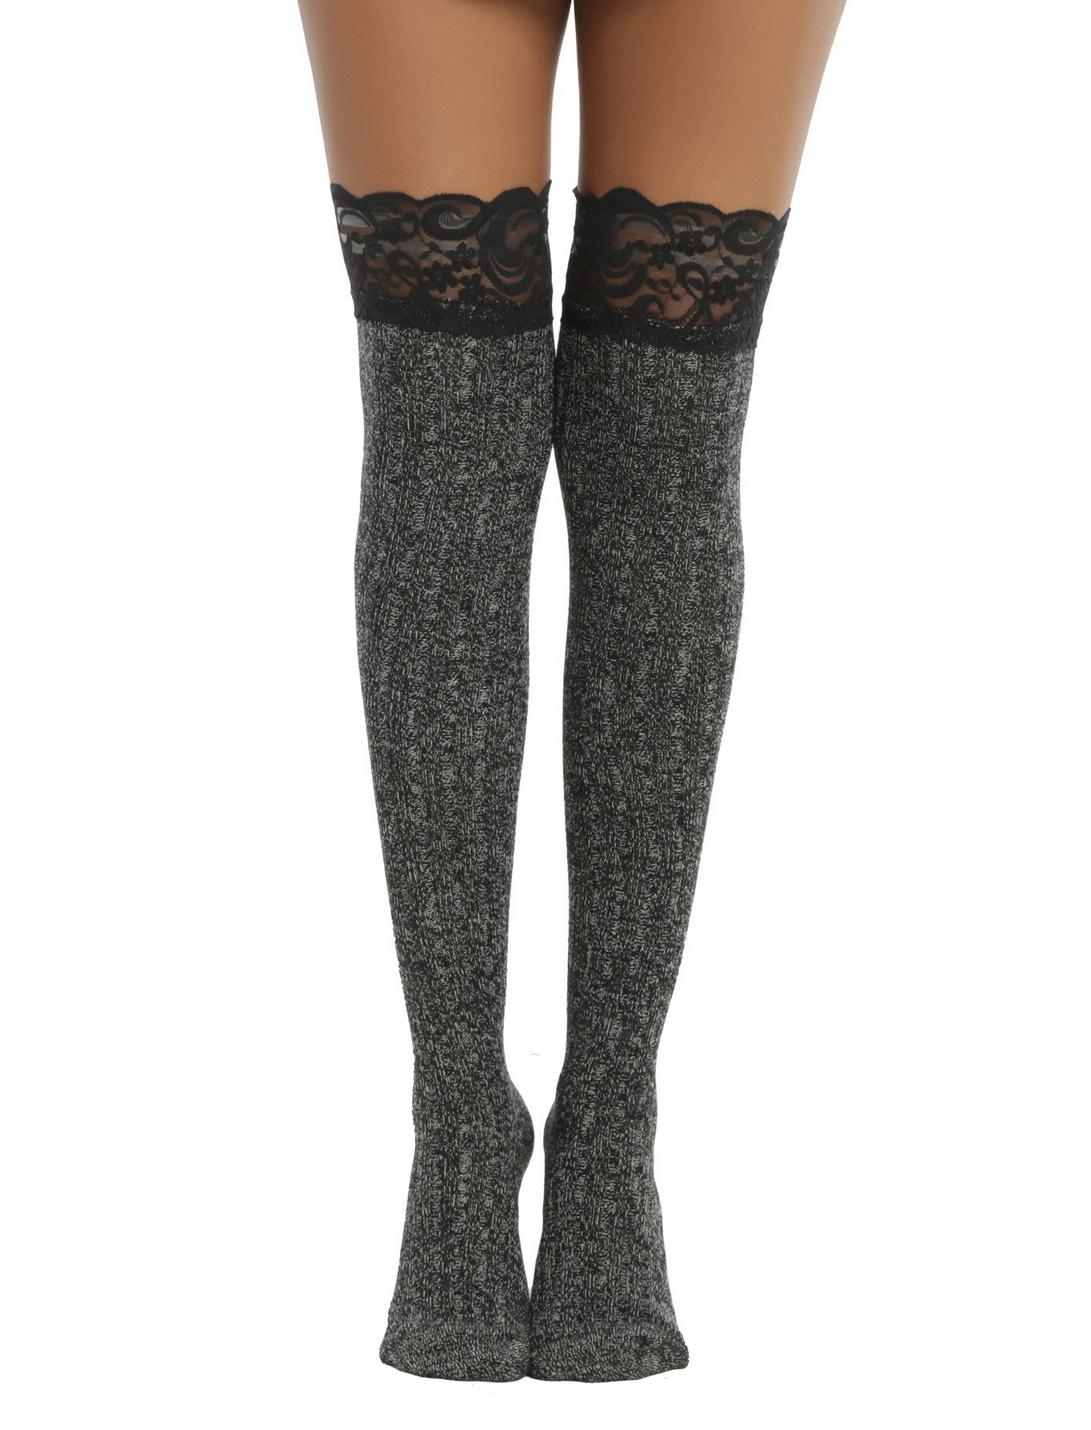 Blackheart Black Lace Cuff Grey Sweater Over-The-Knee Socks, , hi-res